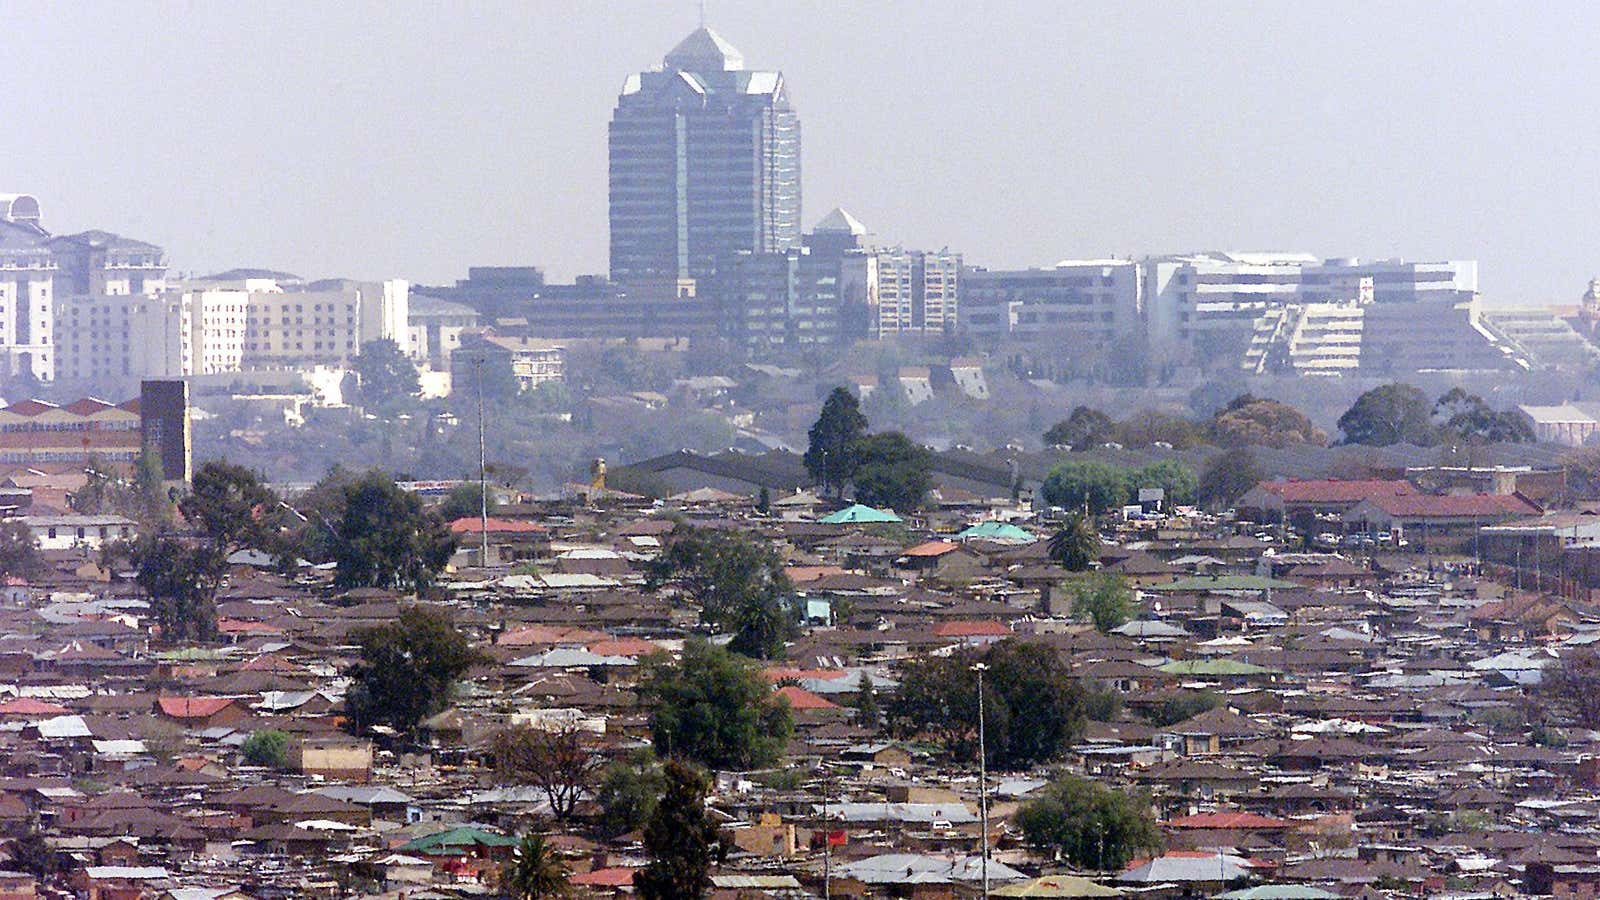 Alexandra, a poor township right next to the wealthy Sandton sky scrappers in Johannesburg